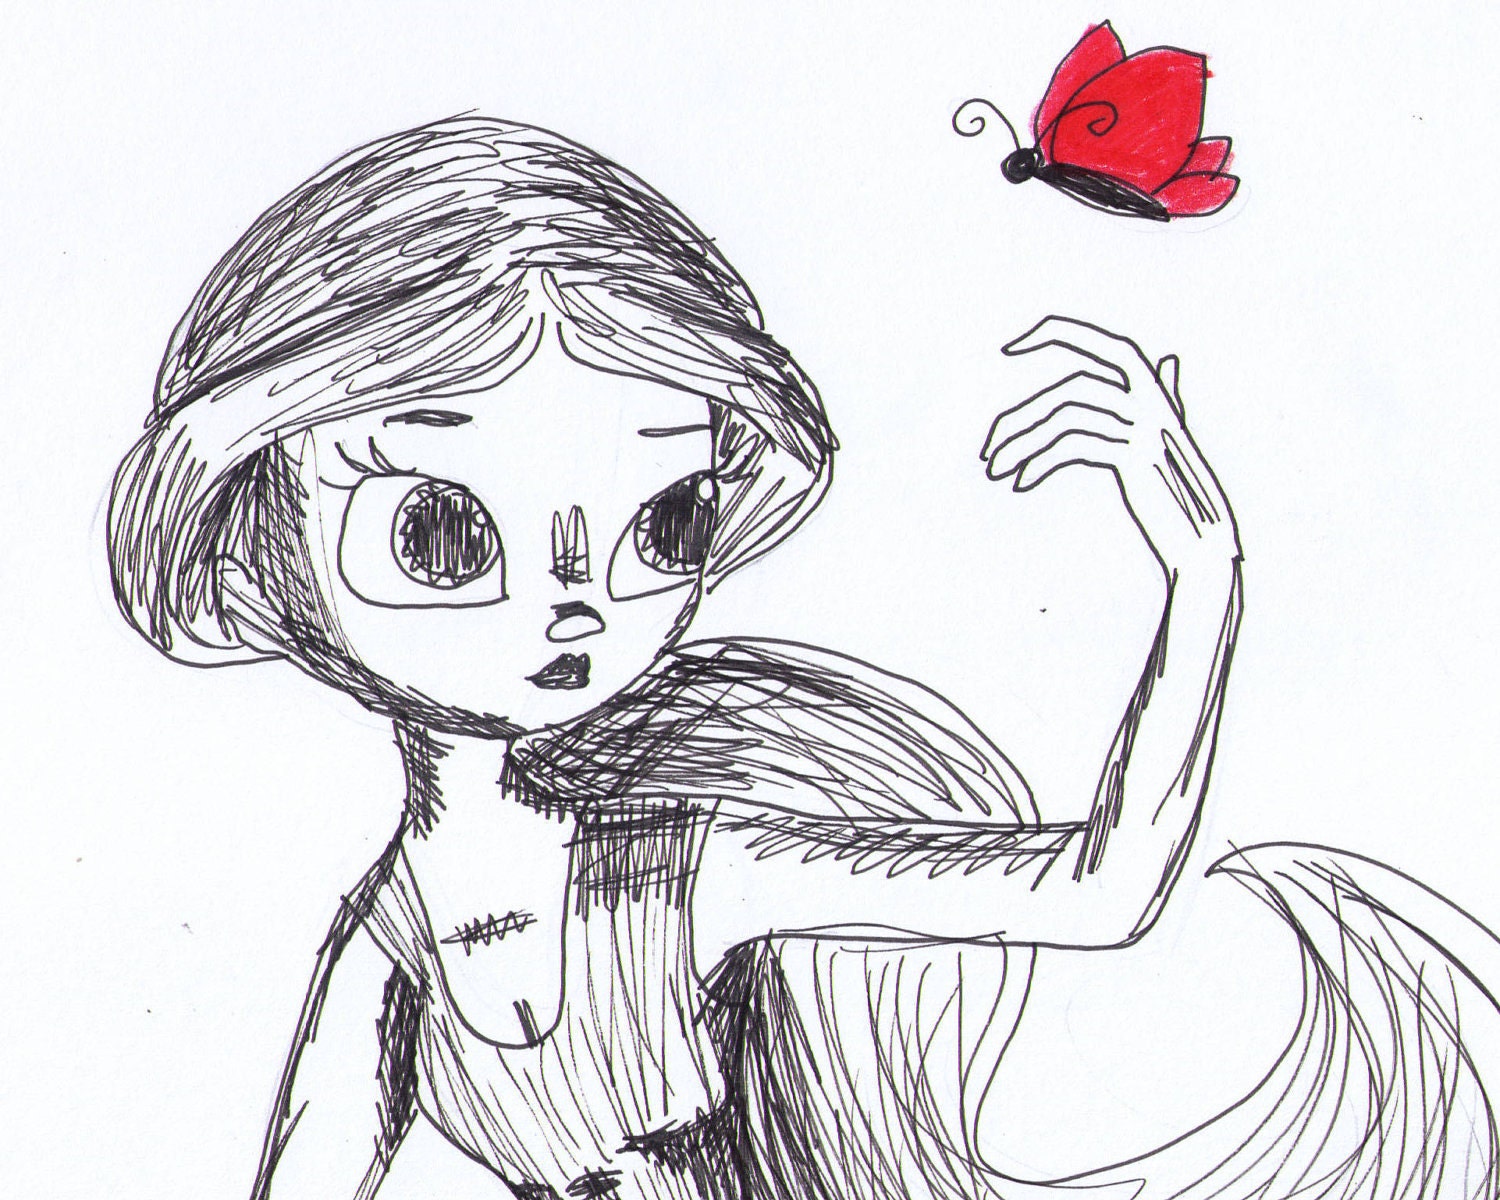 Ink drawing of girl with red butterfly 8x10 sketch print "Butterfly Friend" - Cadouxdle